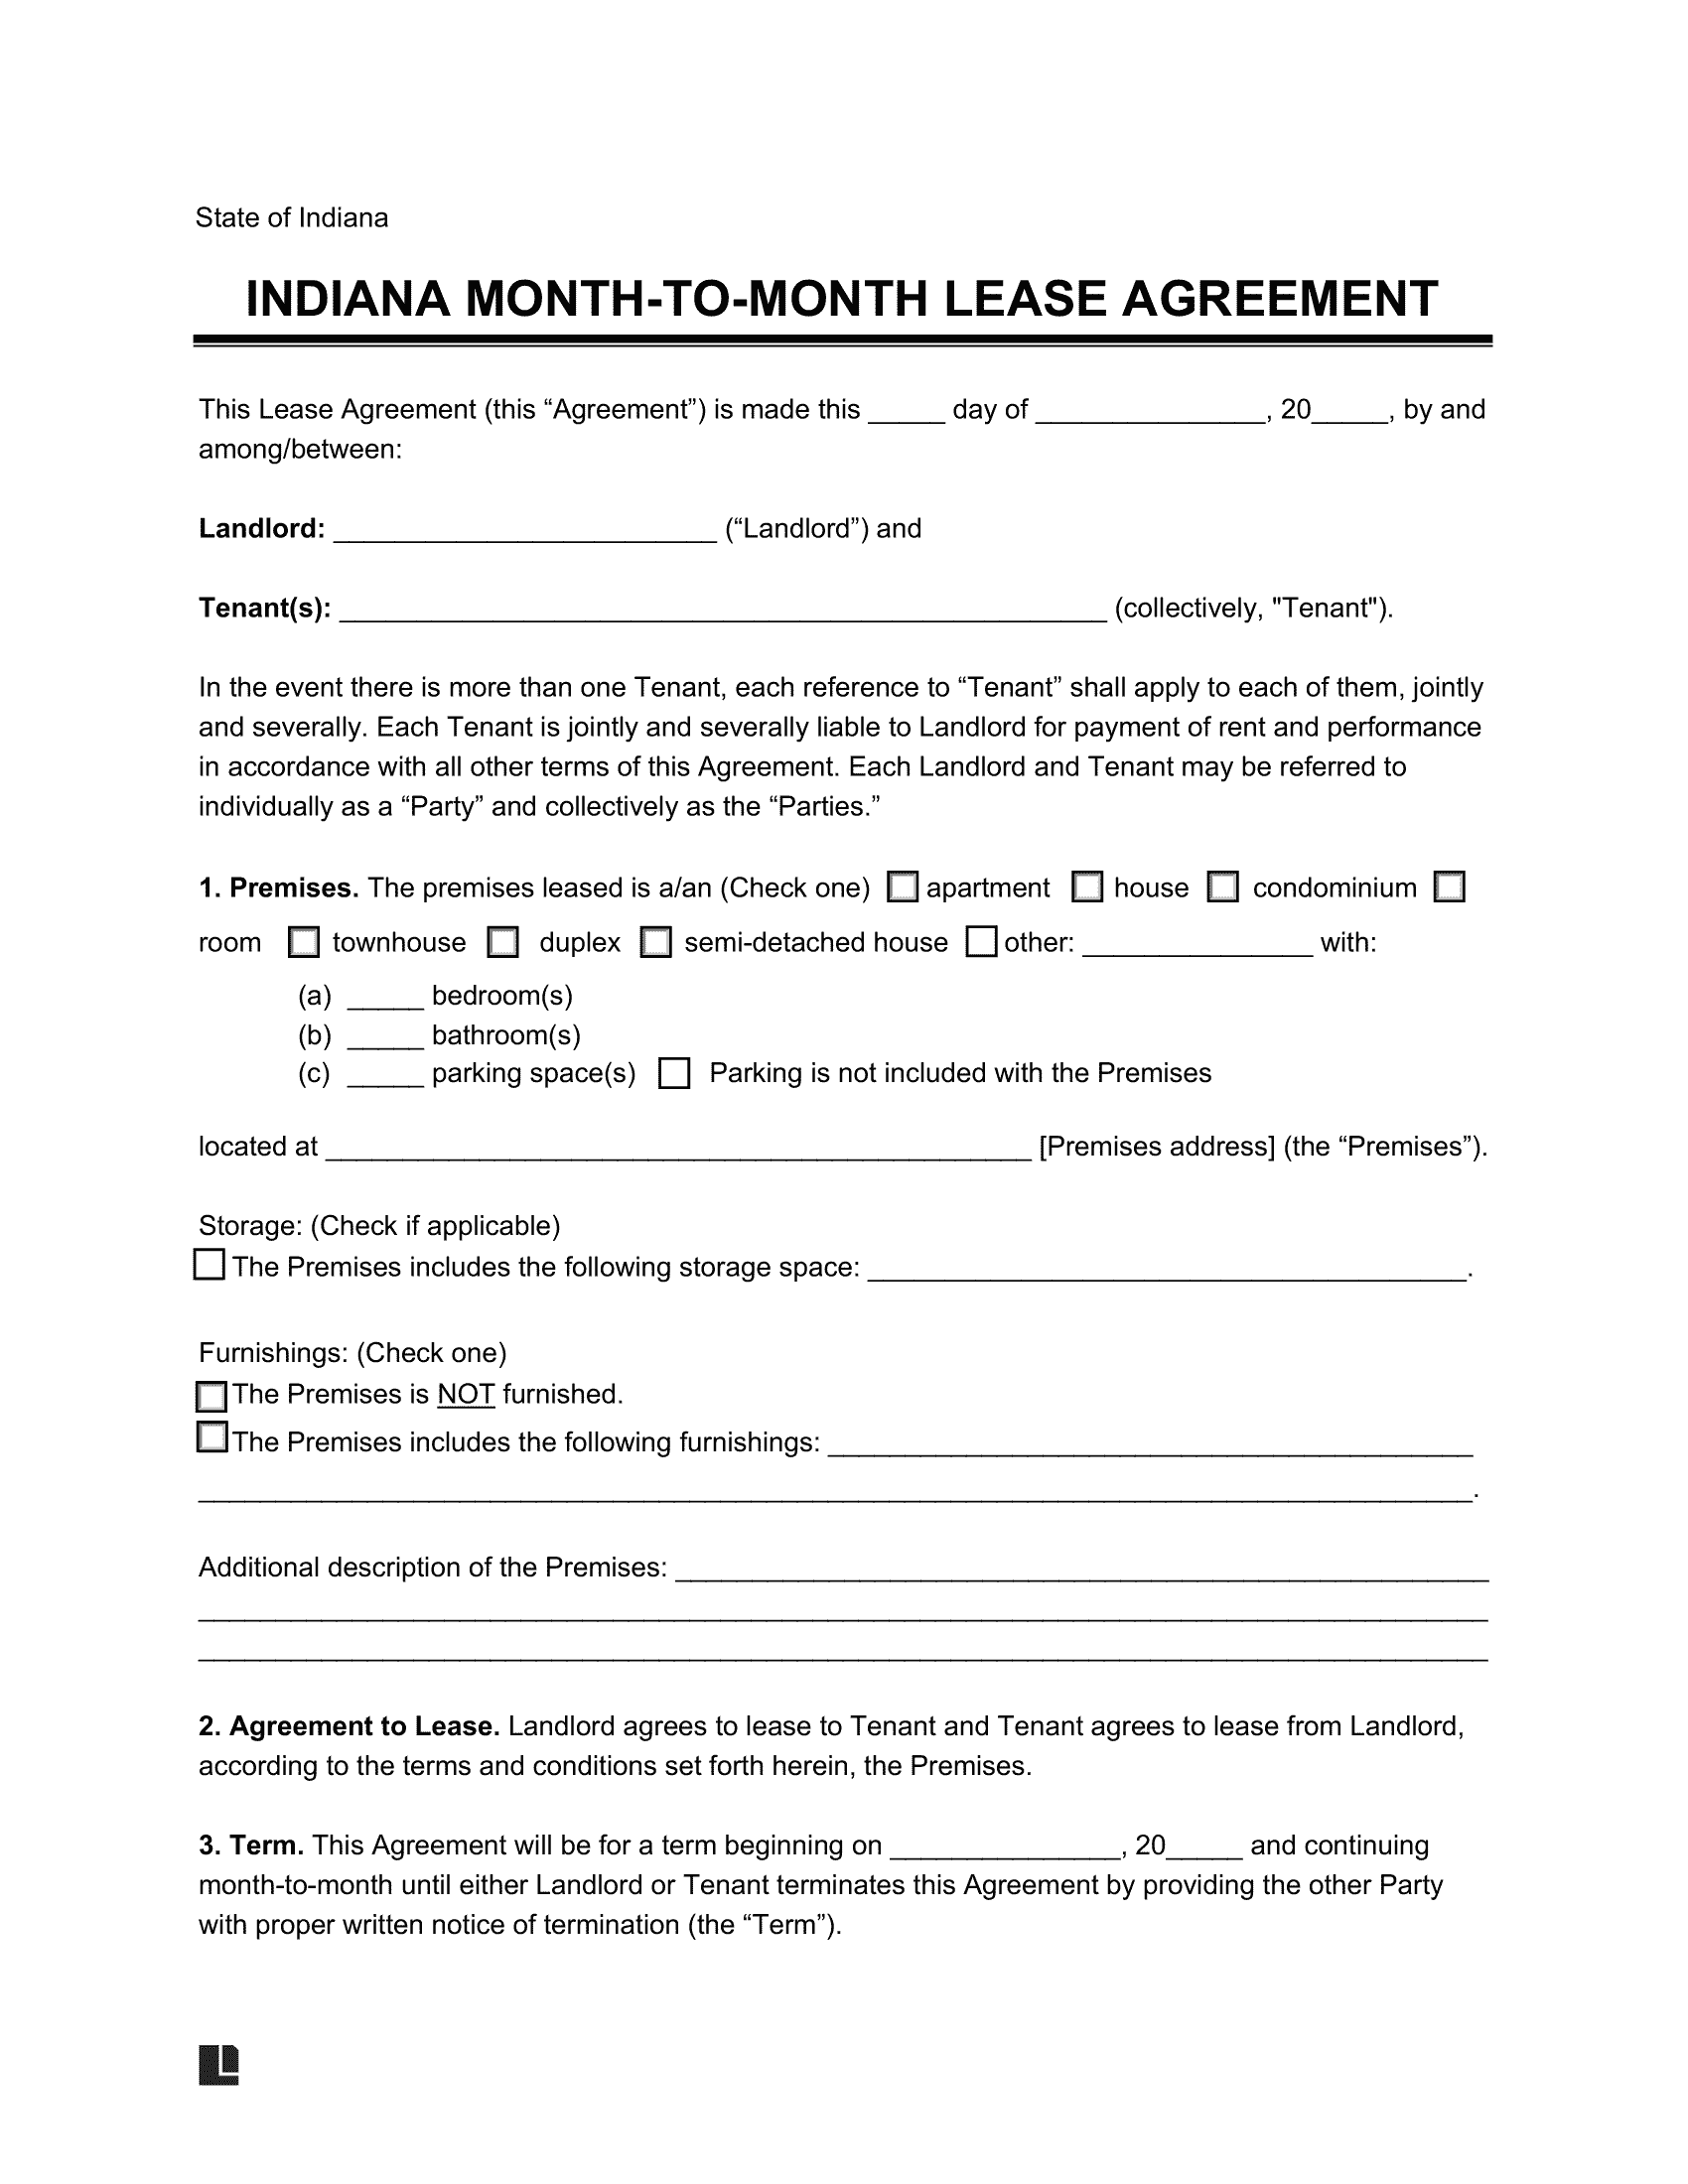 Indiana Month-to-Month Rental Agreement